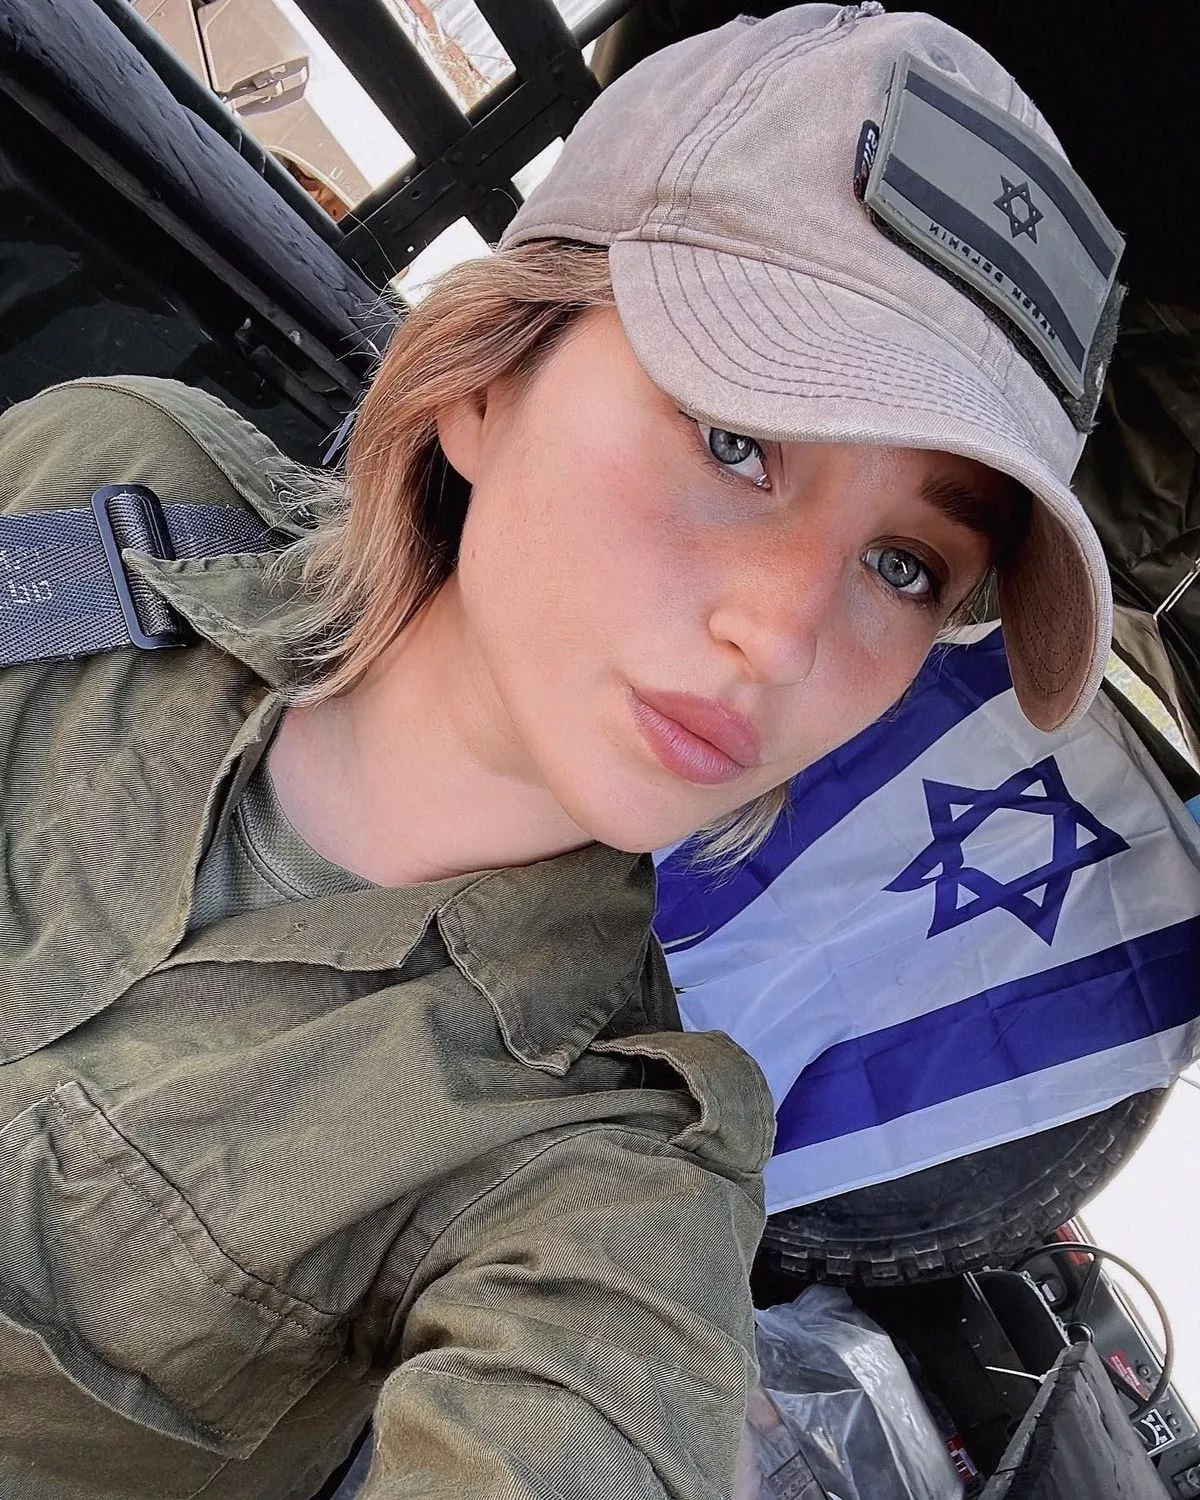 Amidst war, Israel's 'Queen of Guns' resumes posting racy content, asserting that 'life goes on' (4)